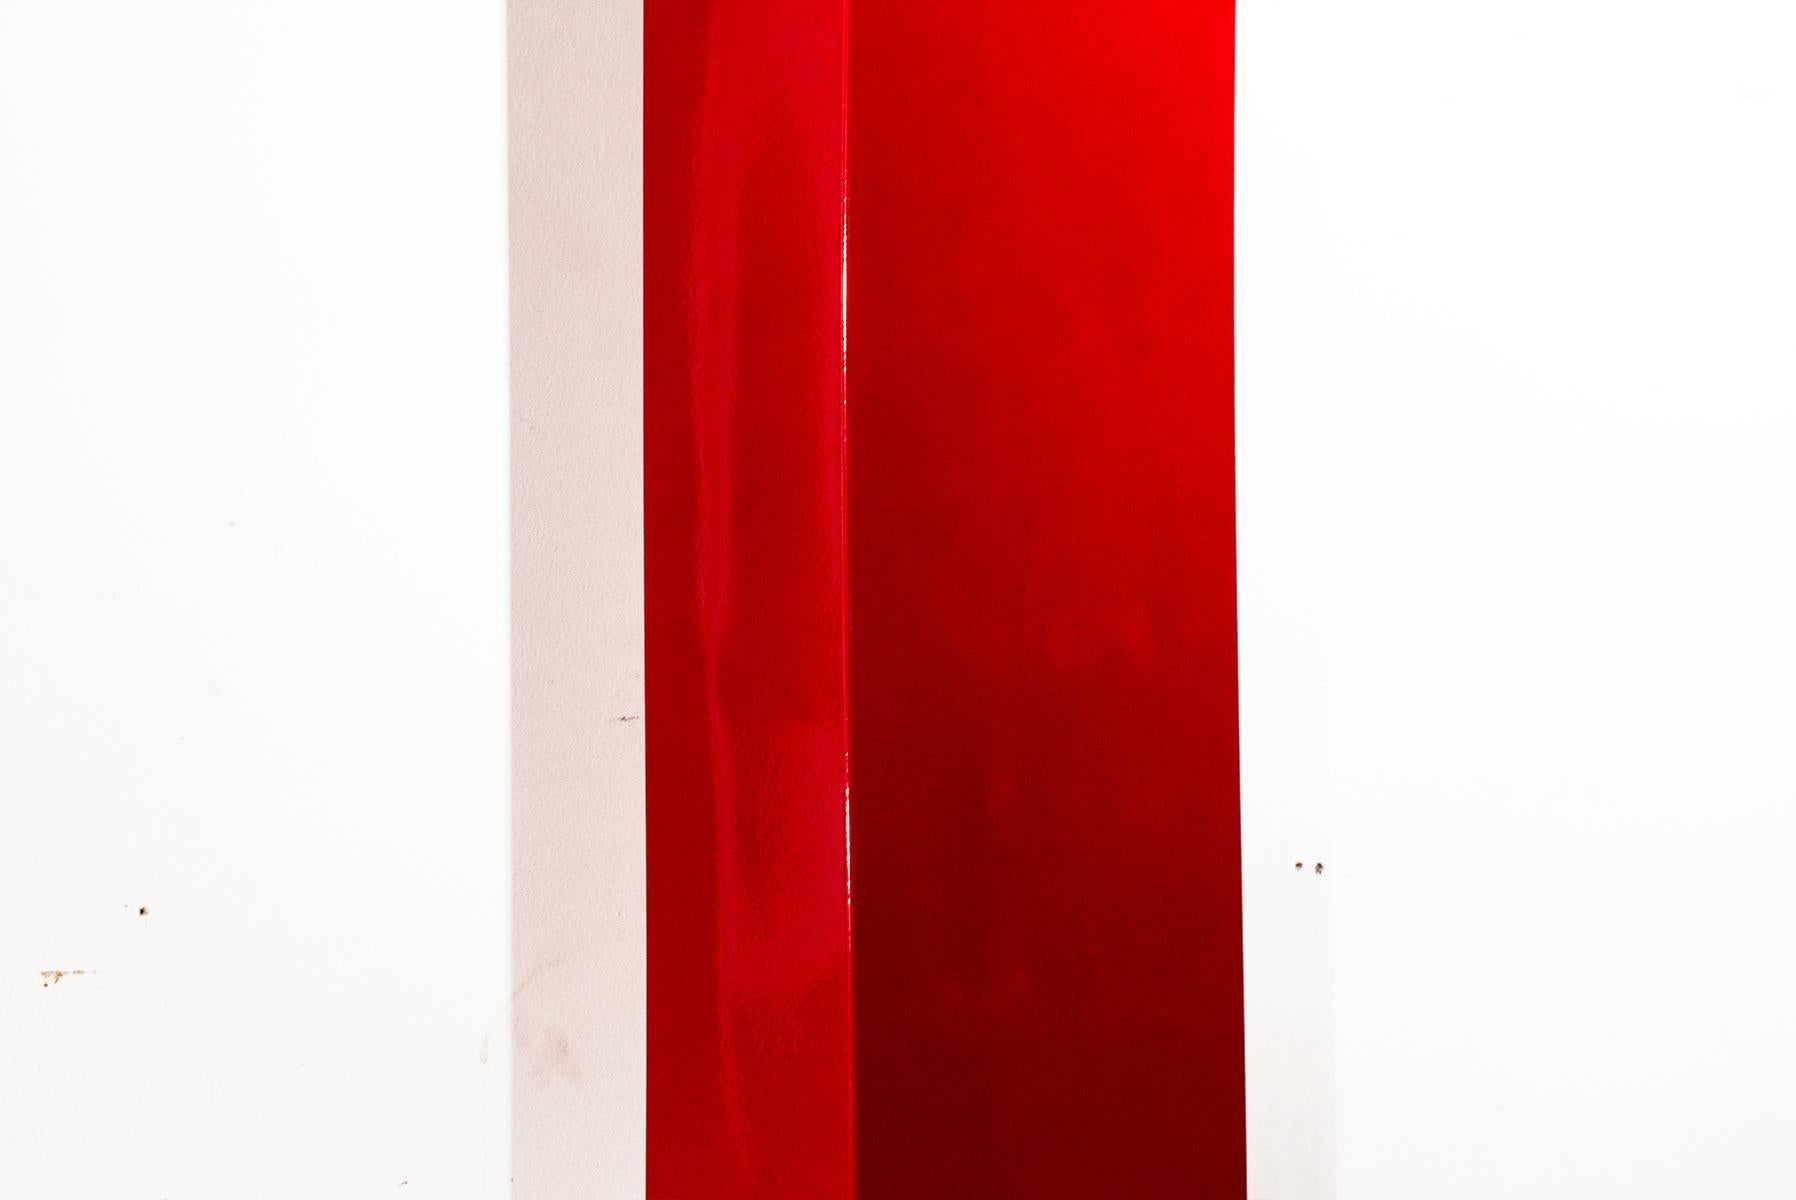 Powder-Coated Extra Long Vintage File Holder in Gloss Red, circa 1960s